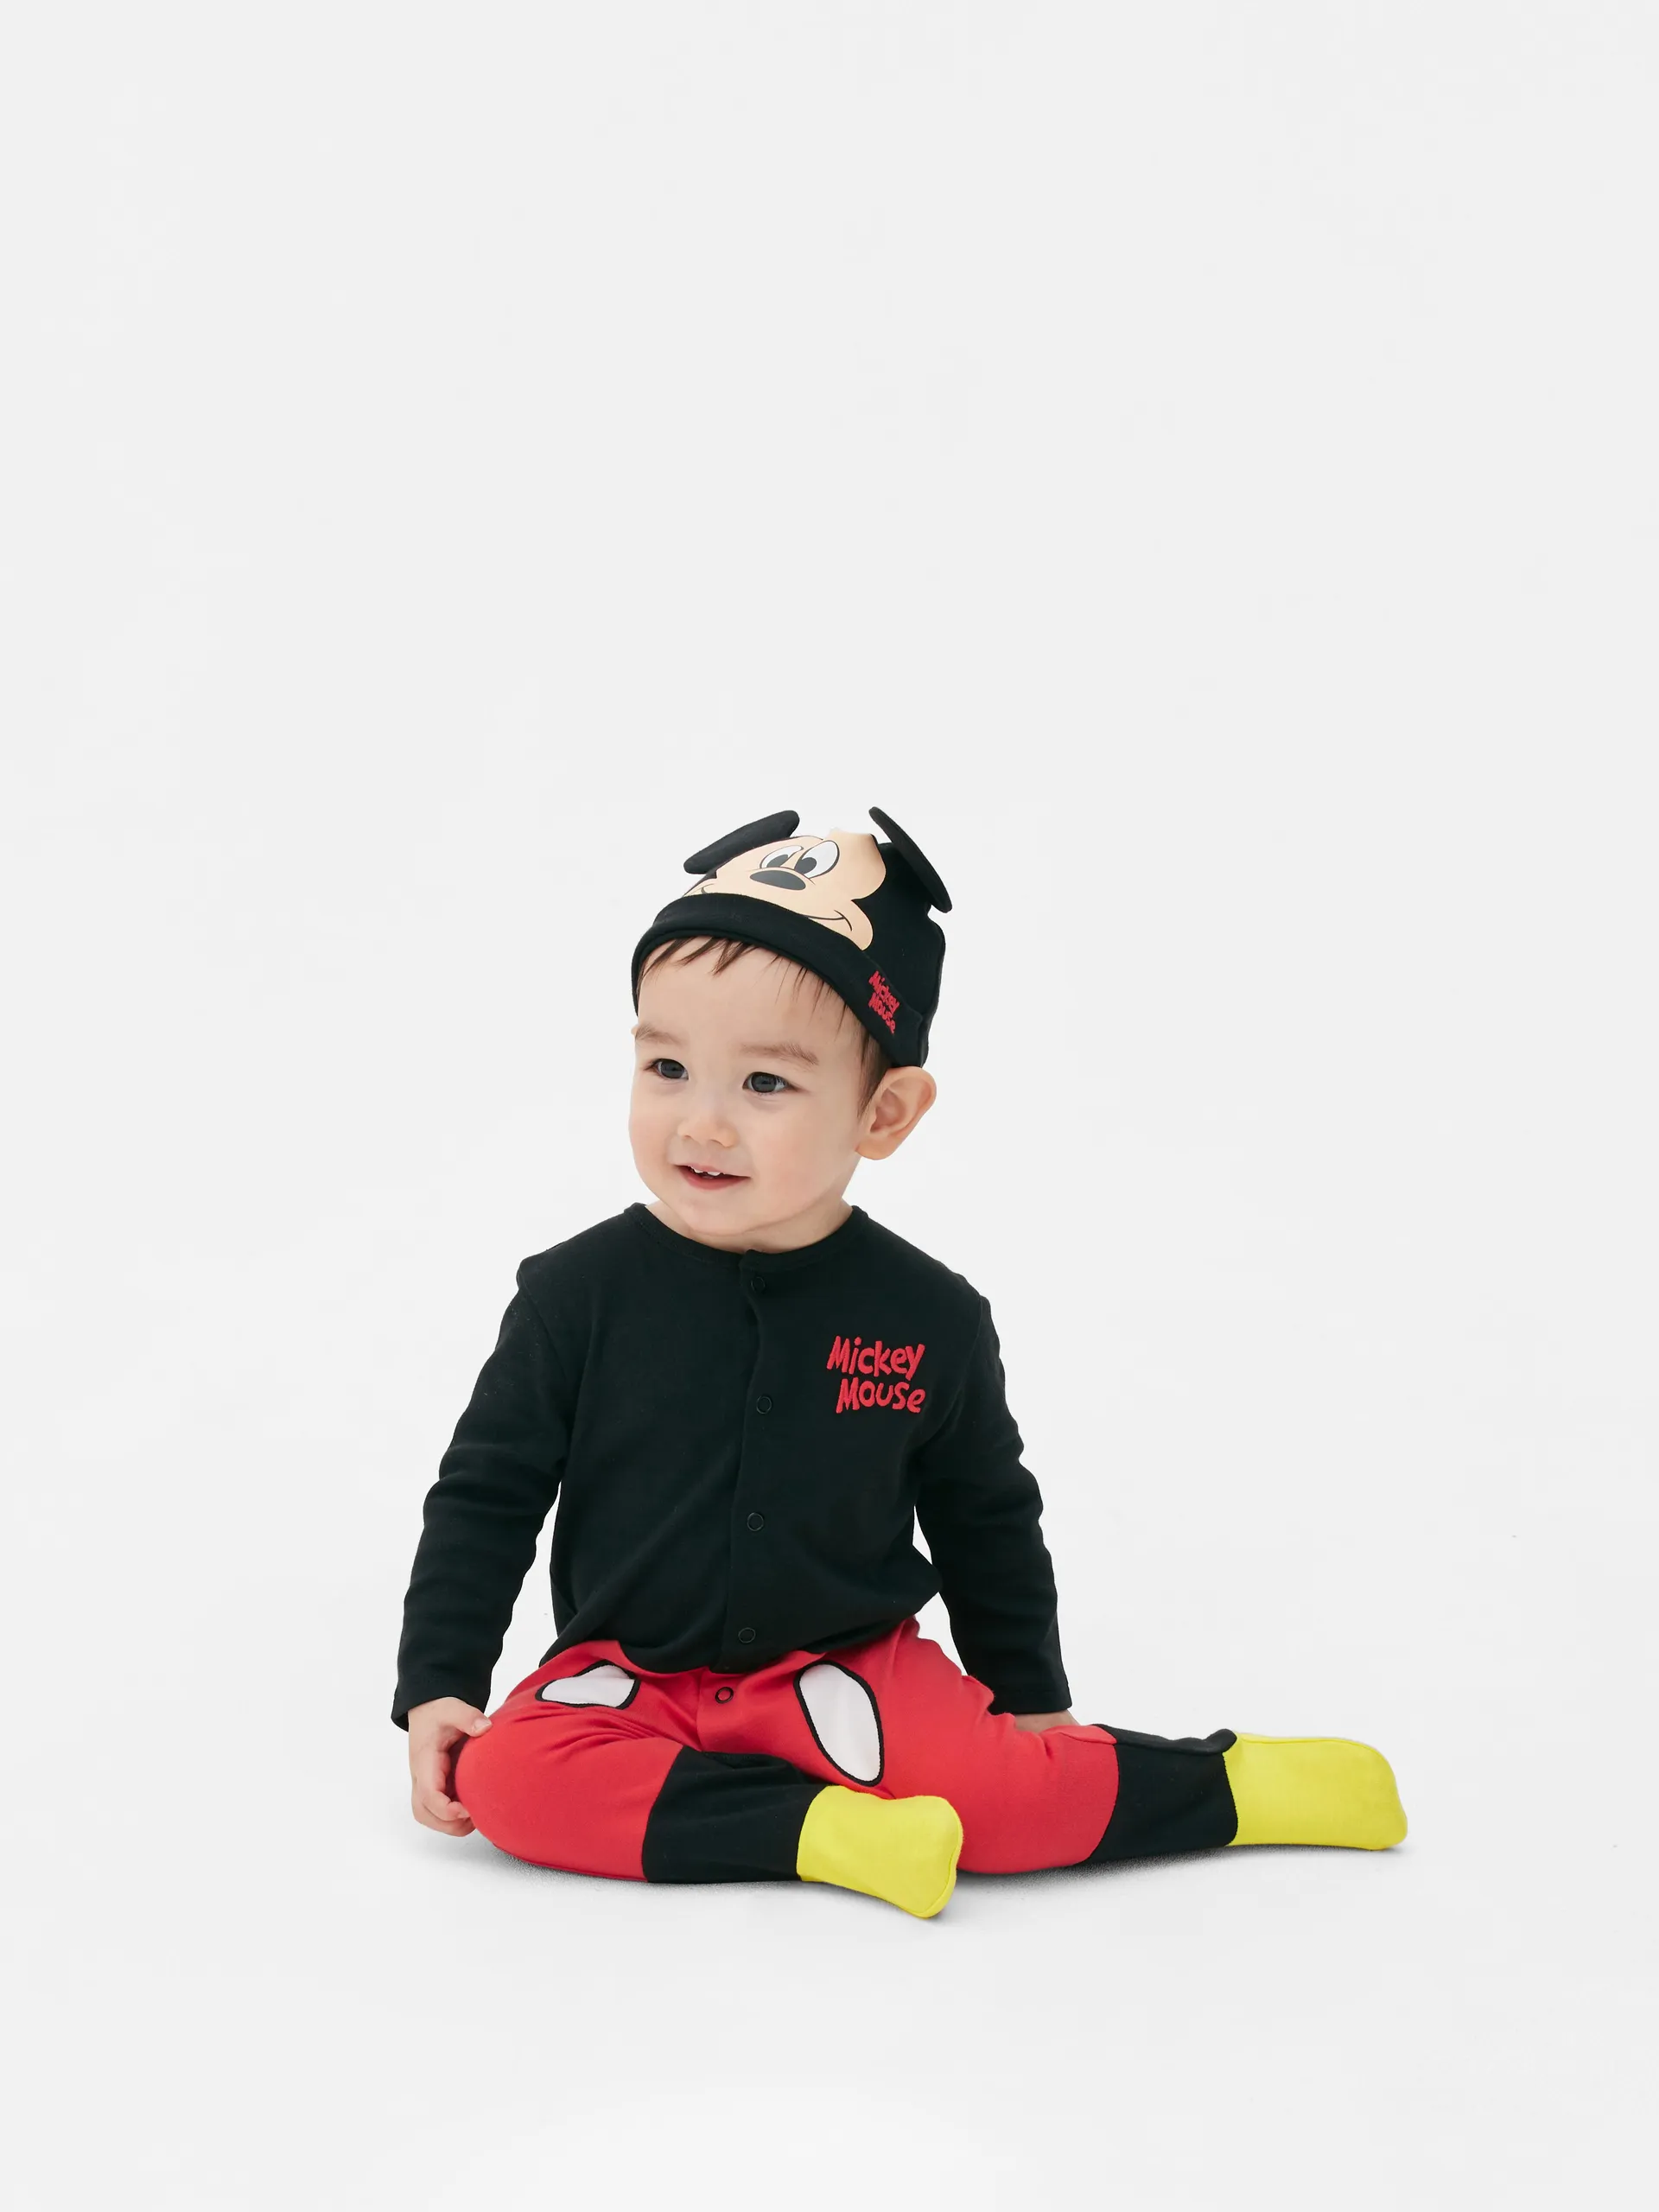 Disney's Mickey Mouse Sleepsuit And Hat Set